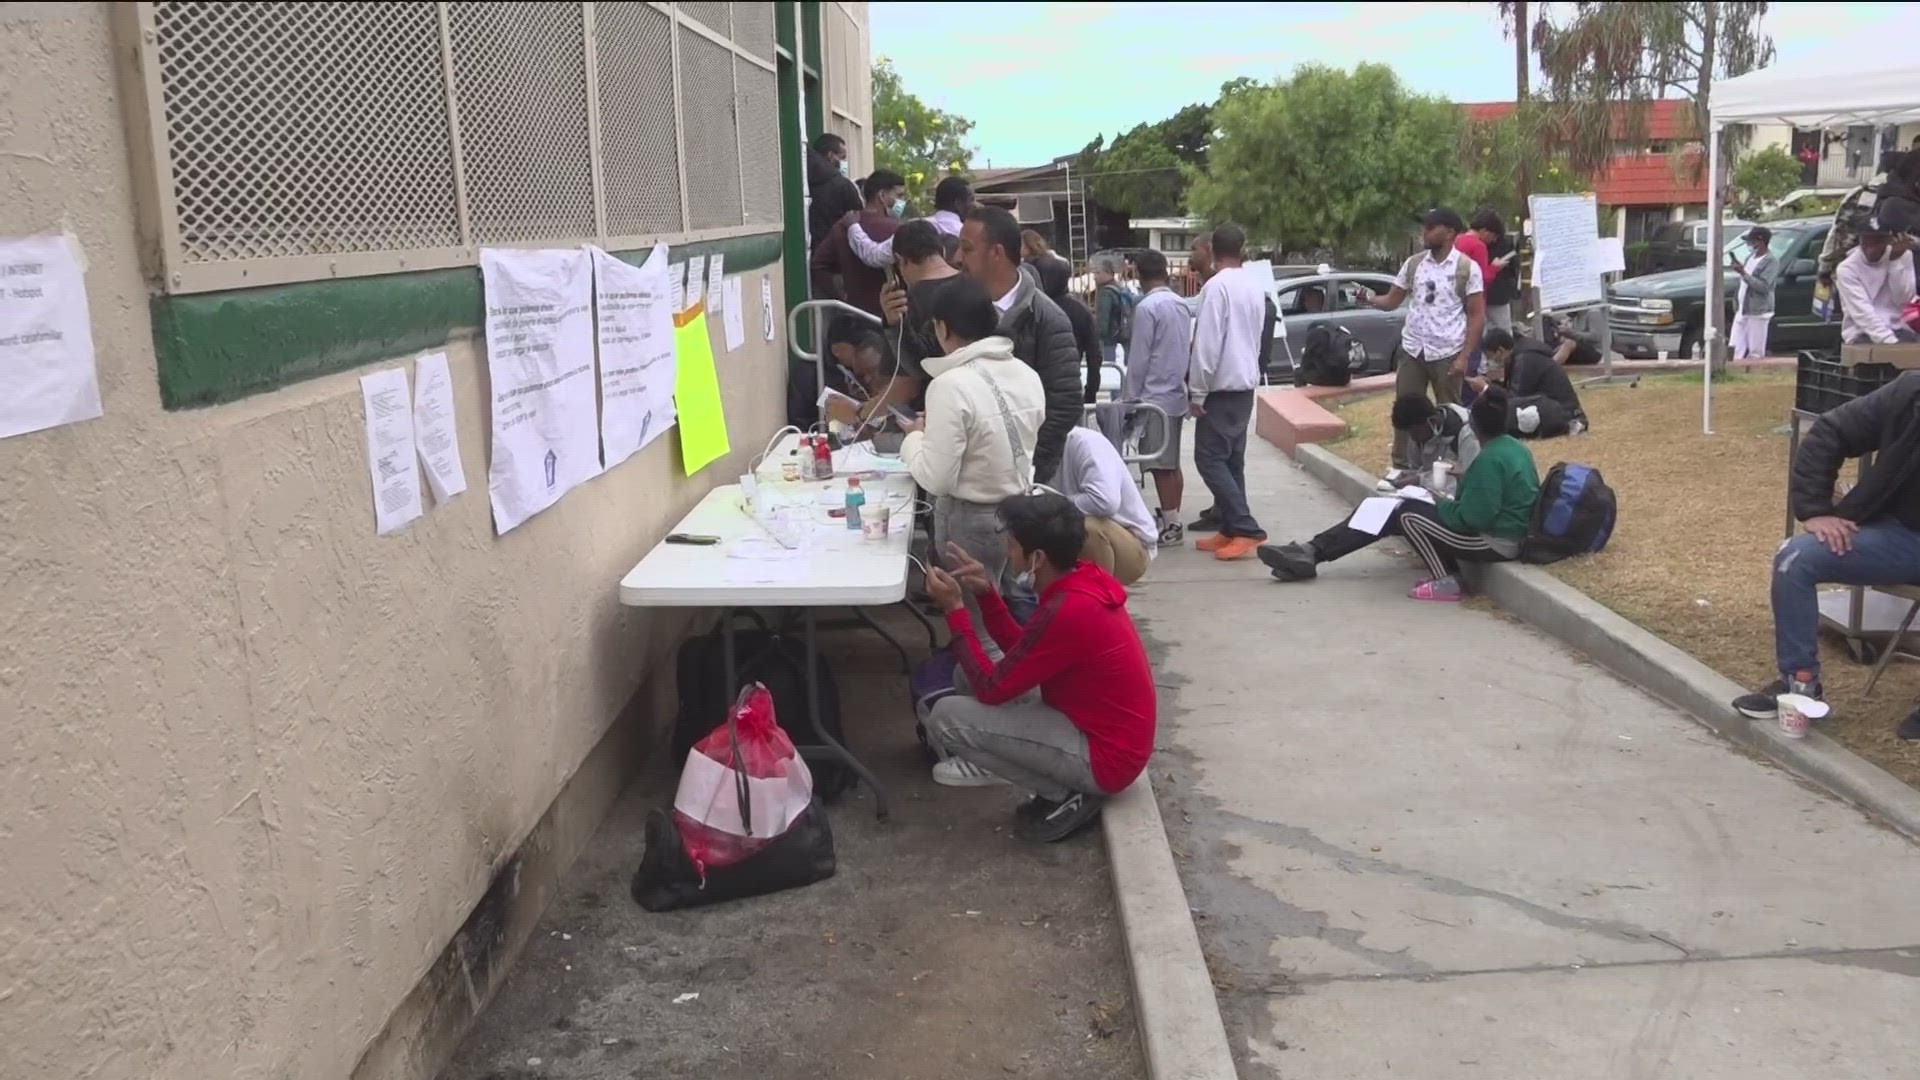 Casa Familiar, a nonprofit in San Ysidro, has helped hundreds of asylum seekers in recent days with basic needs, counseling and paperwork assistance.